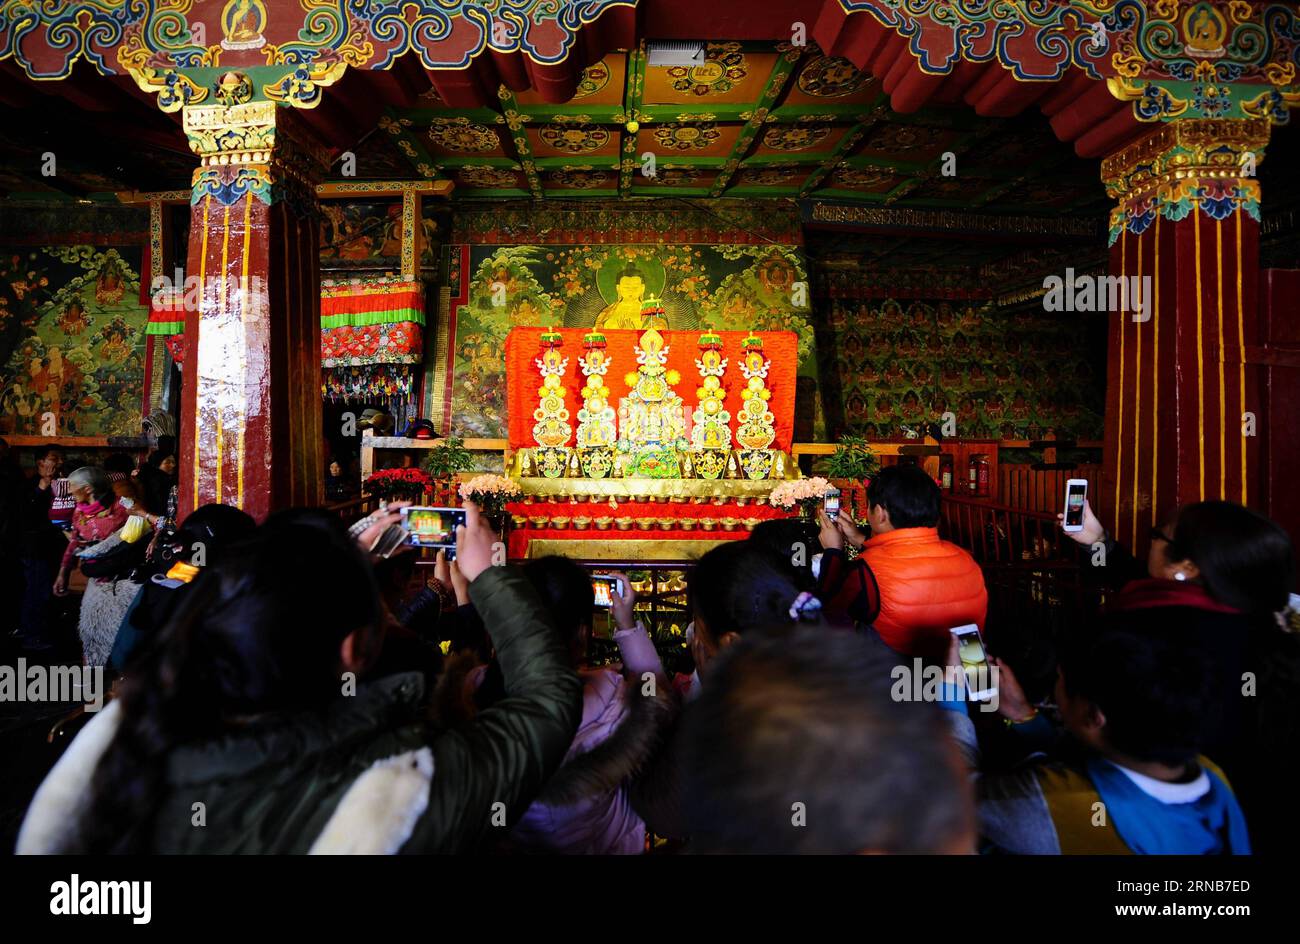 (160222) -- LHASA, Feb. 22, 2016 -- People visit an exhibition of butter sculptures made by Buddhists at Jokhang Temple in Lhasa, capital of southwest China s Tibet Autonomous Region, Feb. 22, 2016. ) (dhf) CHINA-TIBET-JOKHANG TEMPLE-BUTTER SCULPTURE (CN) JigmexDorje PUBLICATIONxNOTxINxCHN   Lhasa Feb 22 2016 Celebrities Visit to Exhibition of Butter Sculptures Made by Buddhists AT Jokhang Temple in Lhasa Capital of Southwest China S Tibet Autonomous Region Feb 22 2016 DHF China Tibet Jokhang Temple Butter Sculpture CN JigmexDorje PUBLICATIONxNOTxINxCHN Stock Photo